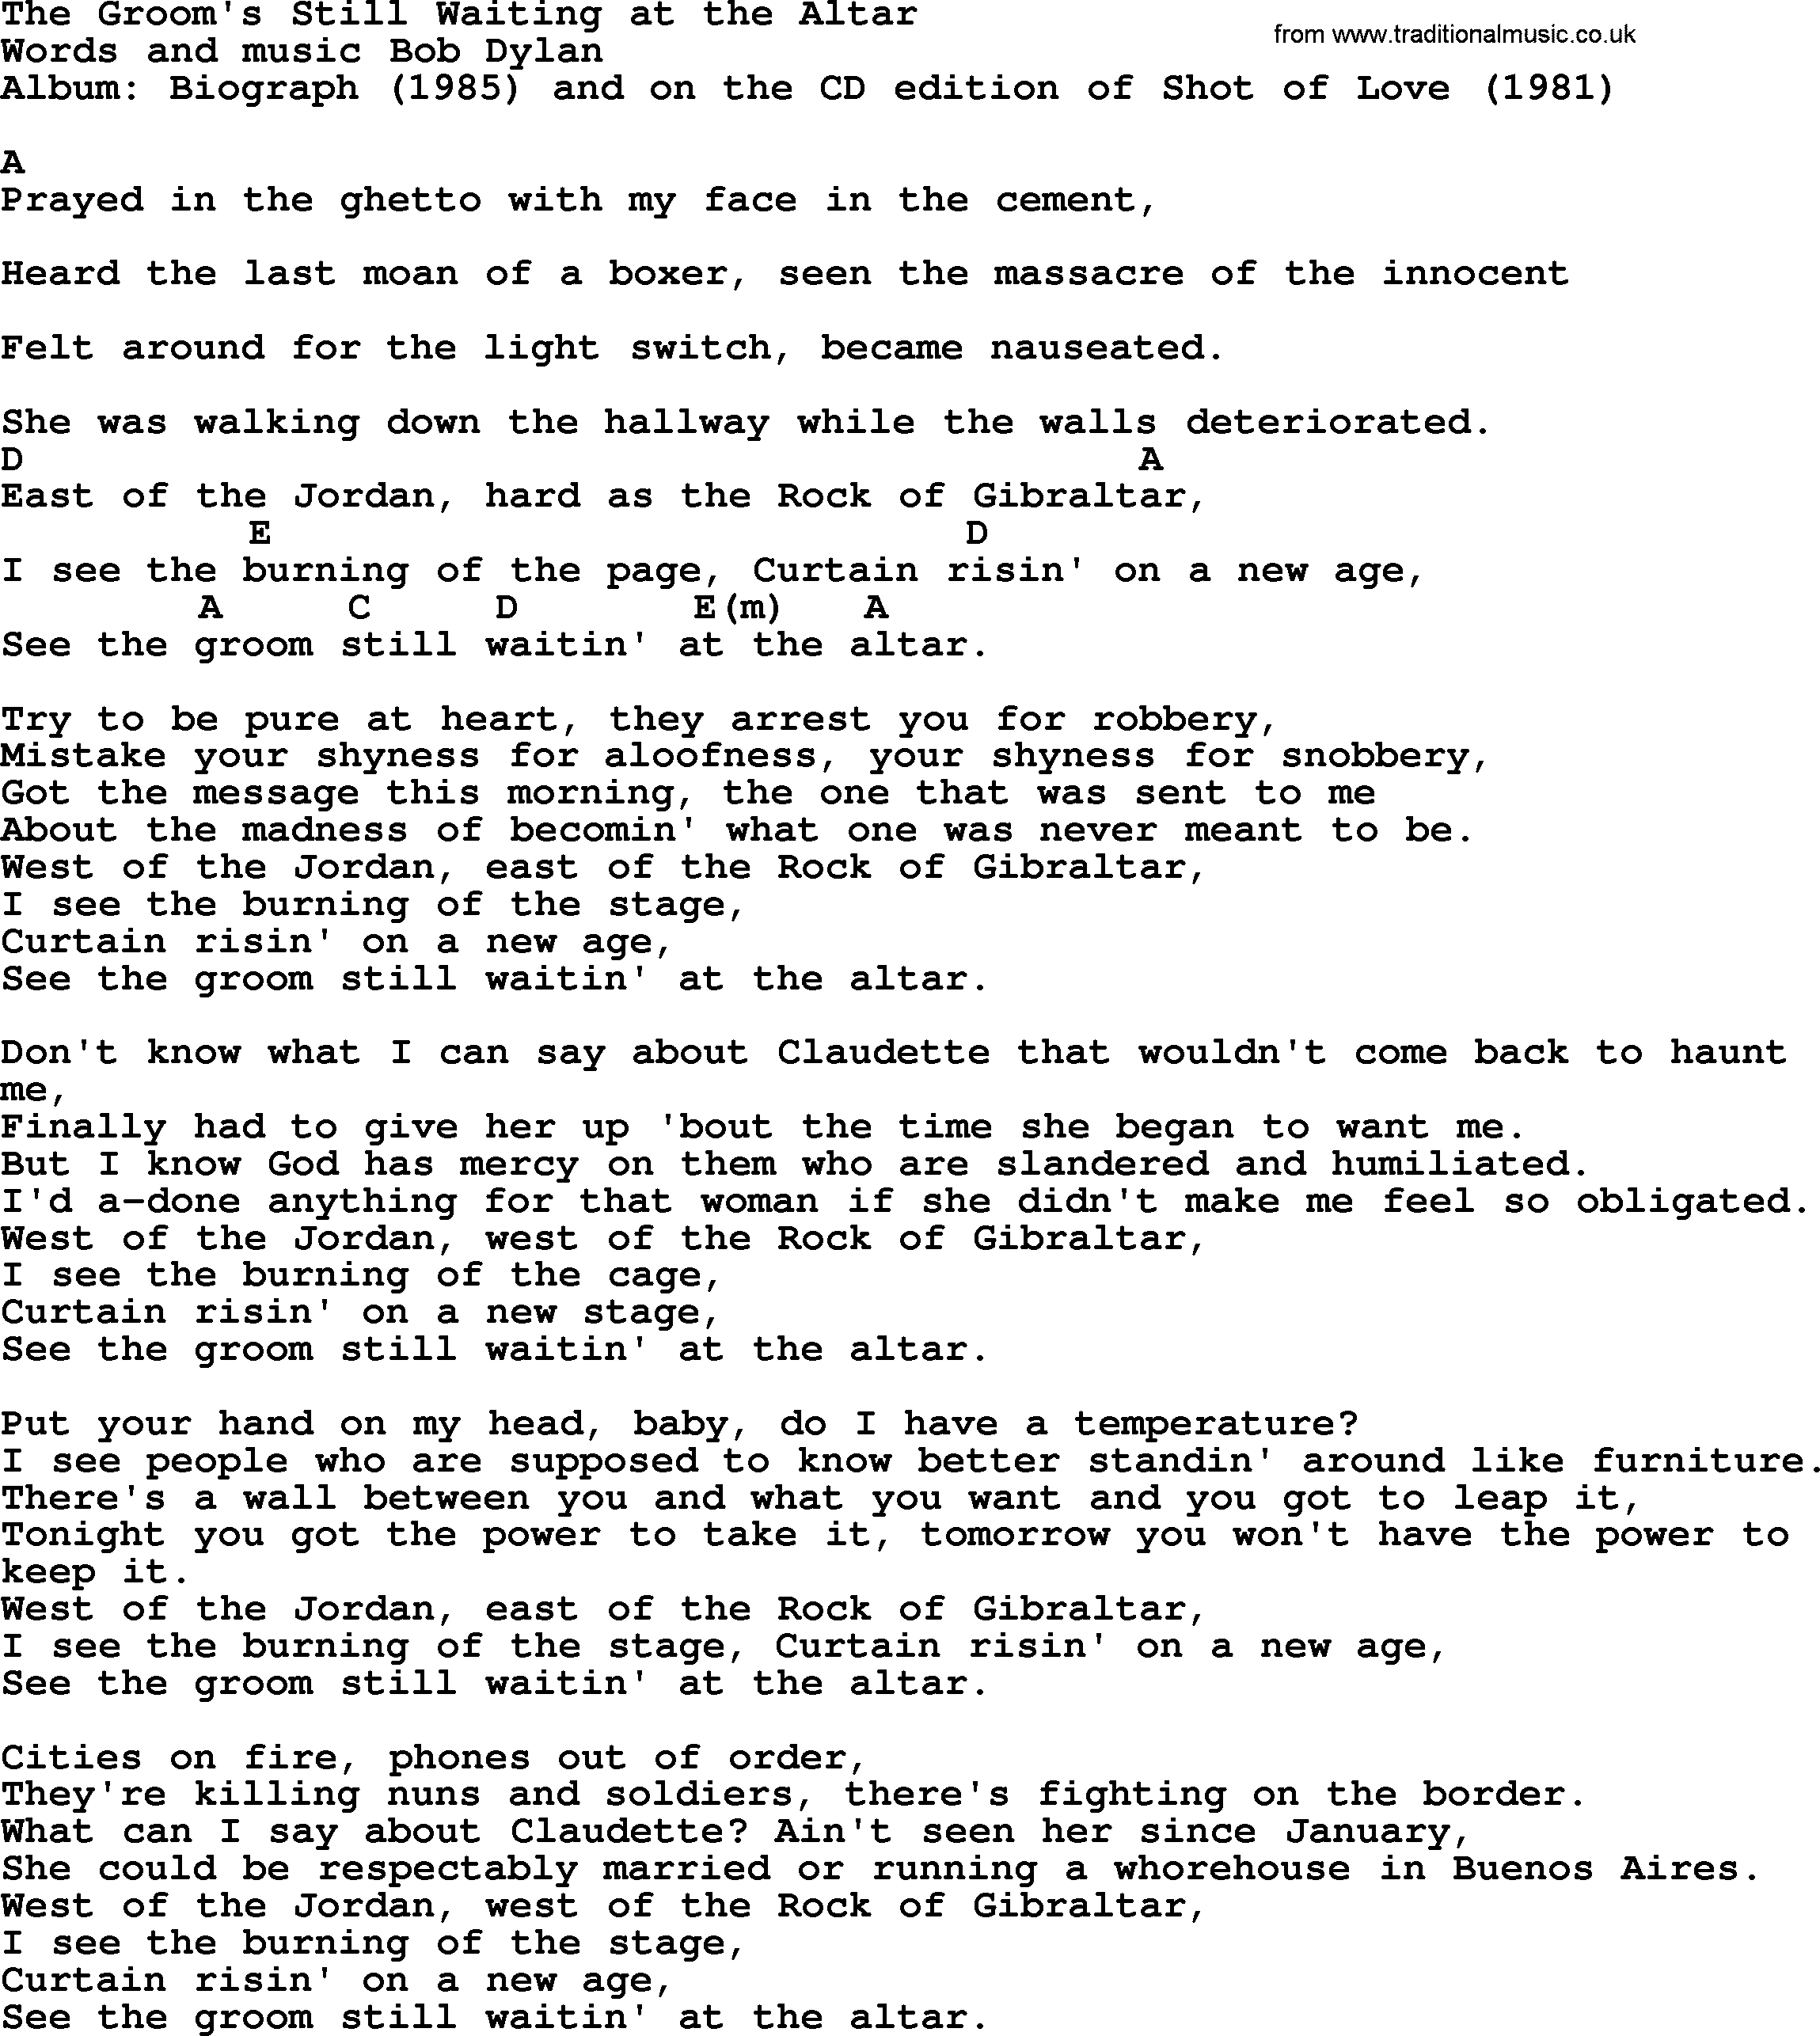 Bob Dylan song, lyrics with chords - The Groom's Still Waiting at the Altar